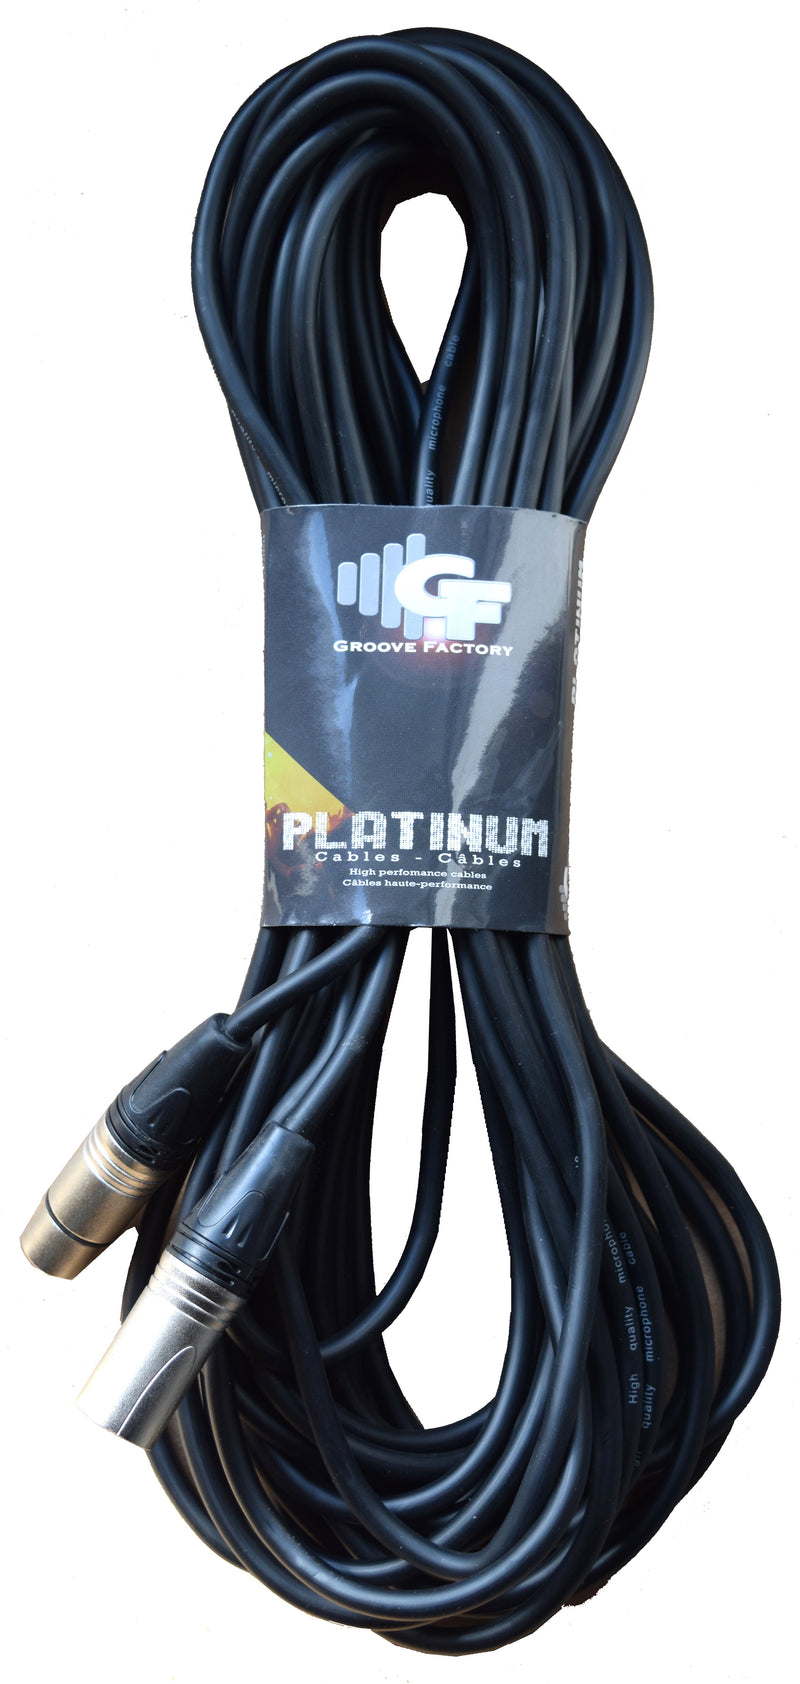 Groove Factory XLR to XLR Microphone Cable - 50 Feet